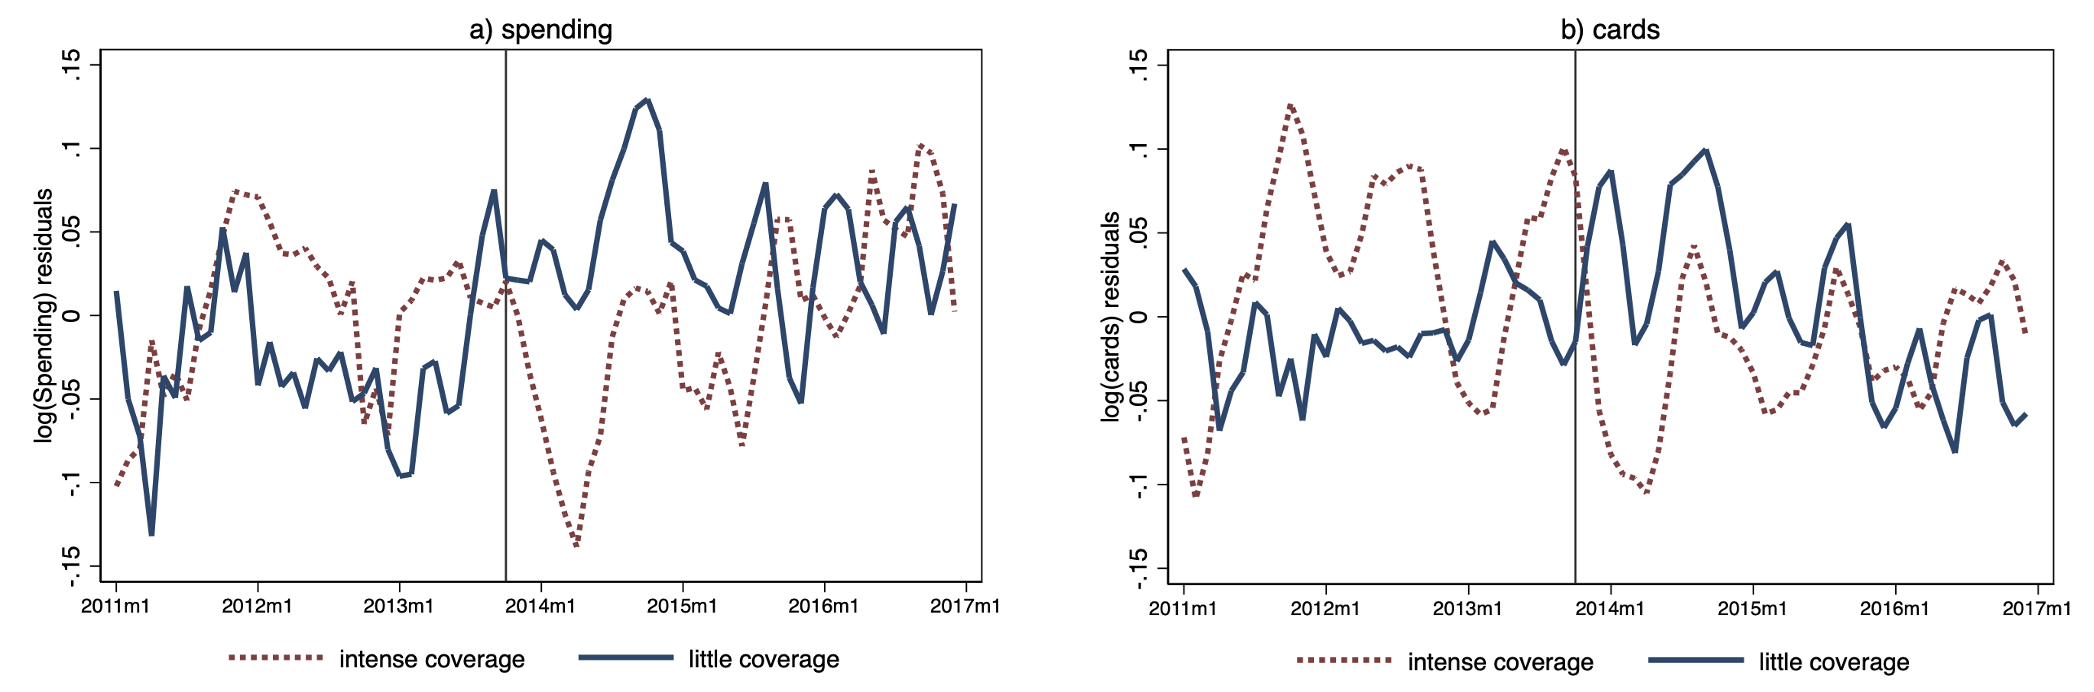 Figure 1 Card activity in Tunisia on dyads with more/less news coverage of violence